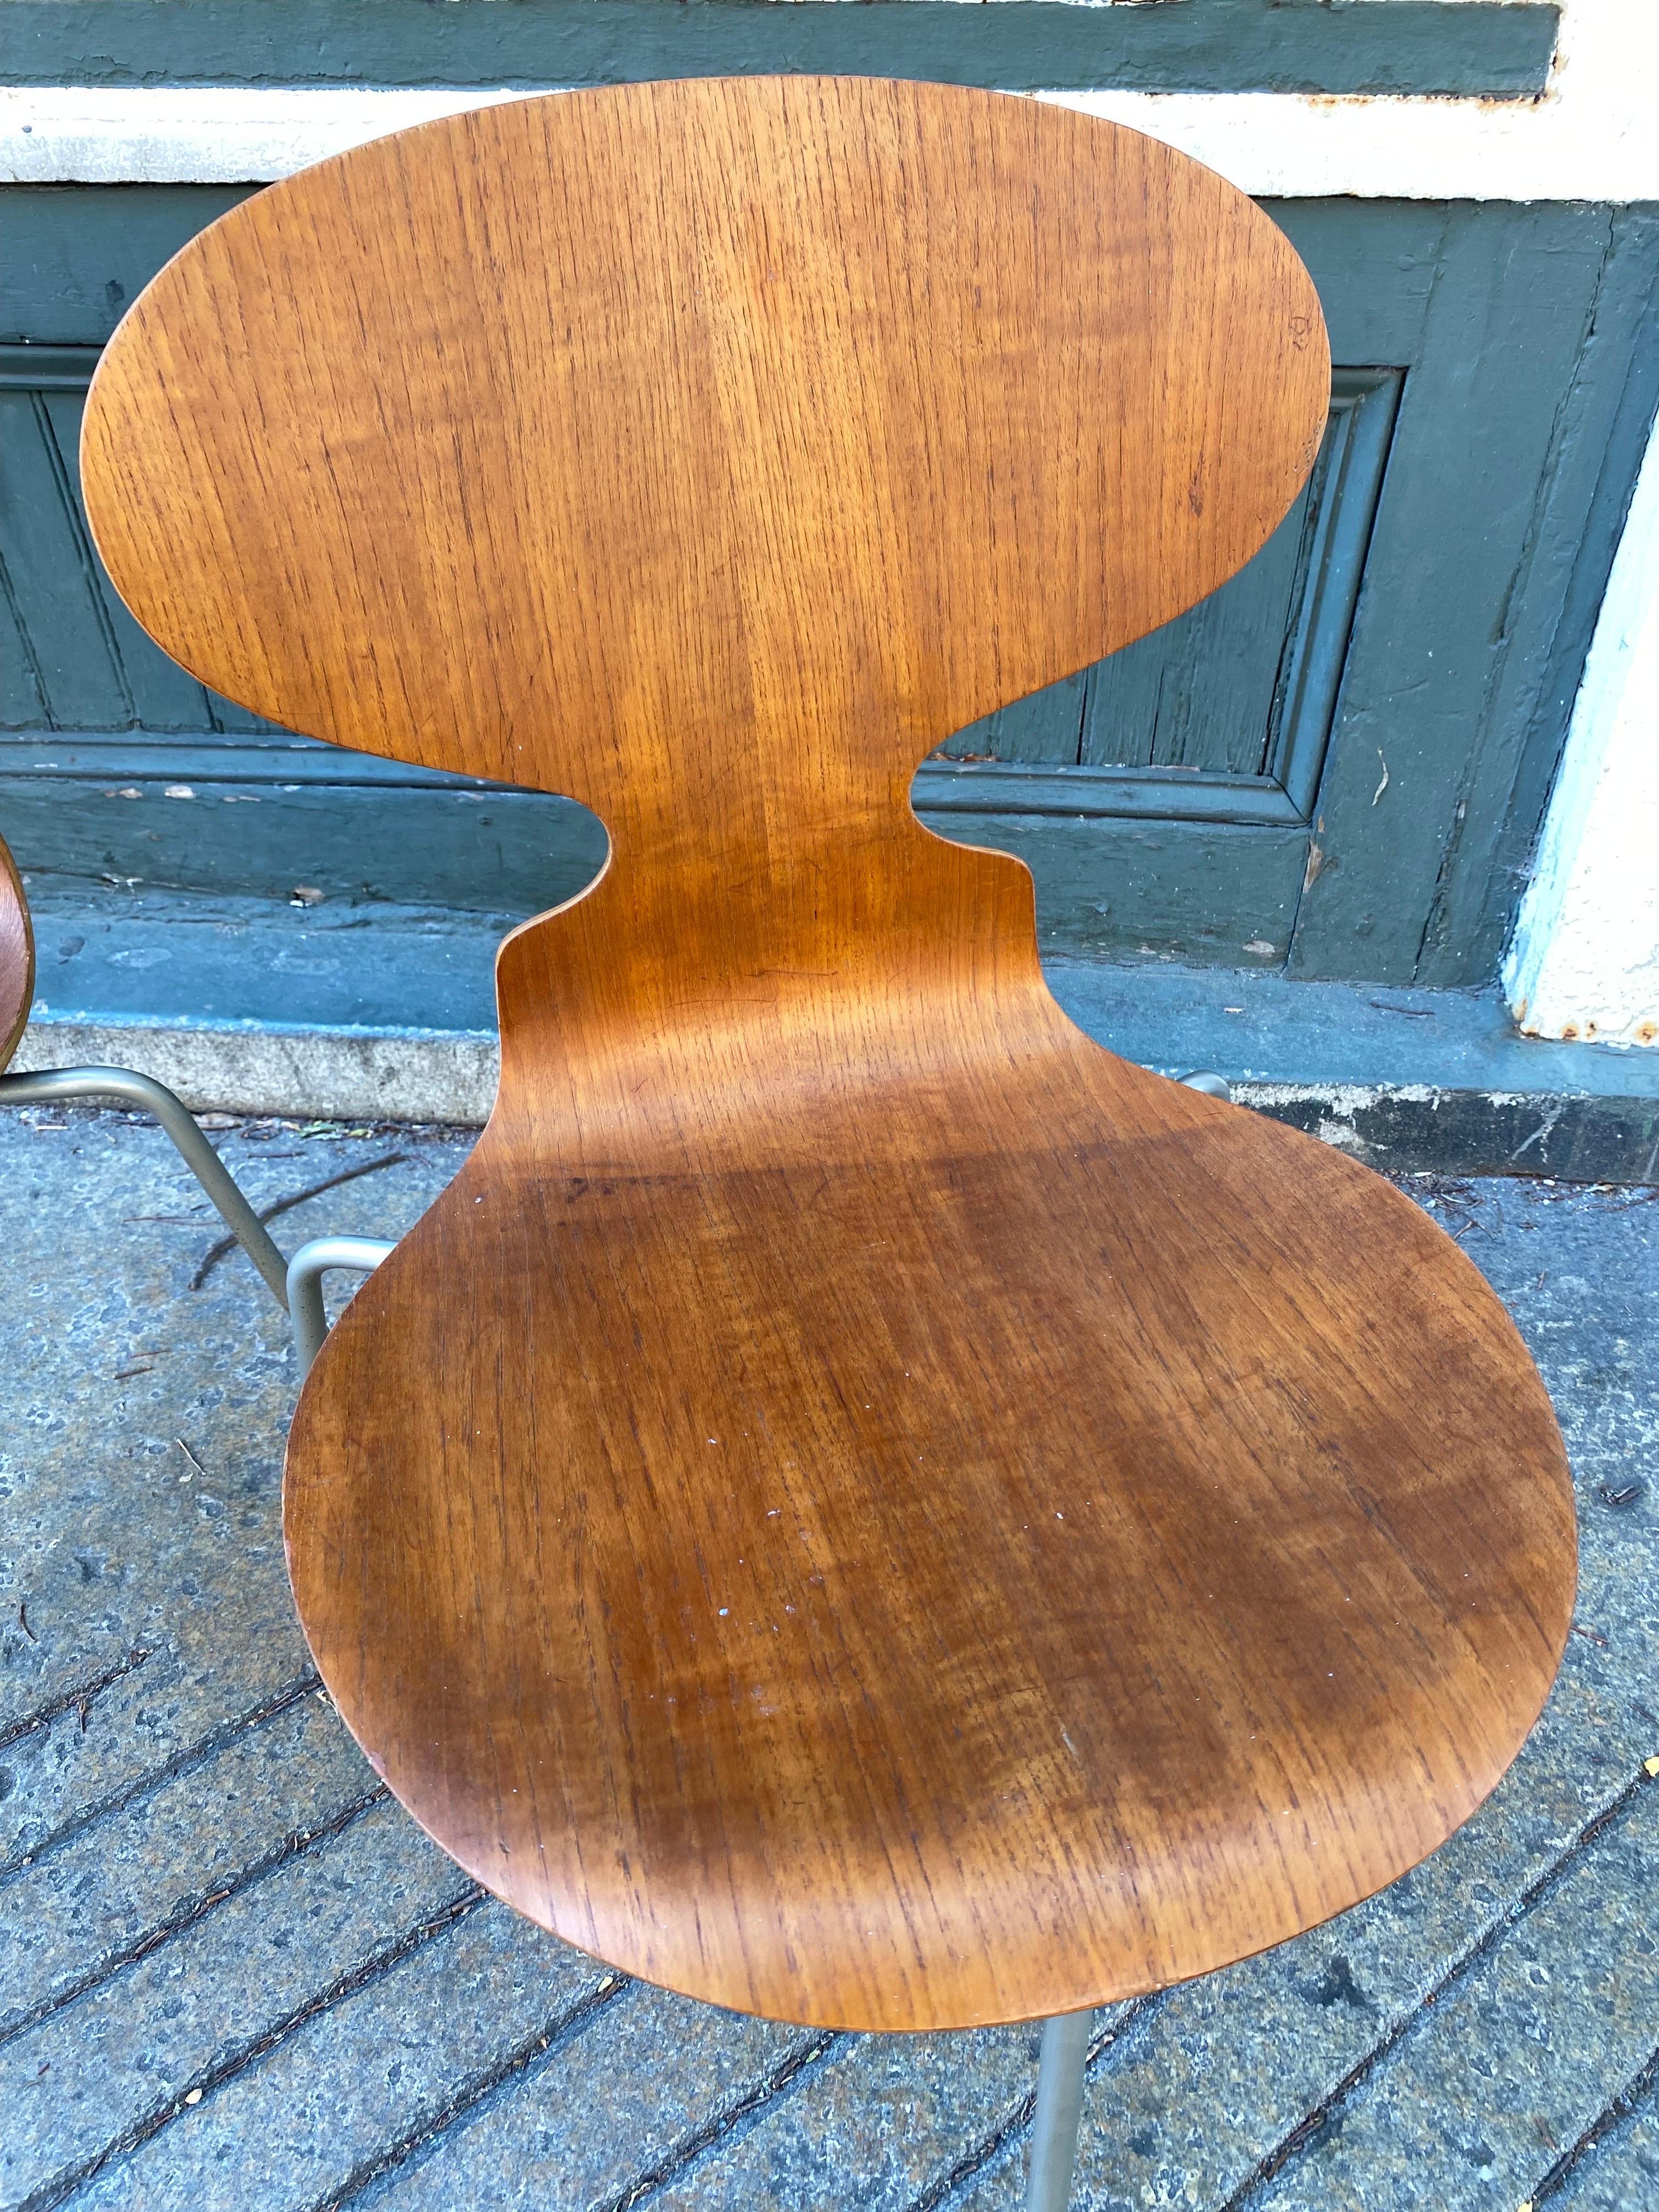 Pair of Arne Jacobsen Teak Ant Chairs. Overall very nice shape, signs of shadow on one seat area as seen in photo. Spines are in good shape and no veneer chips! Chairs stack!